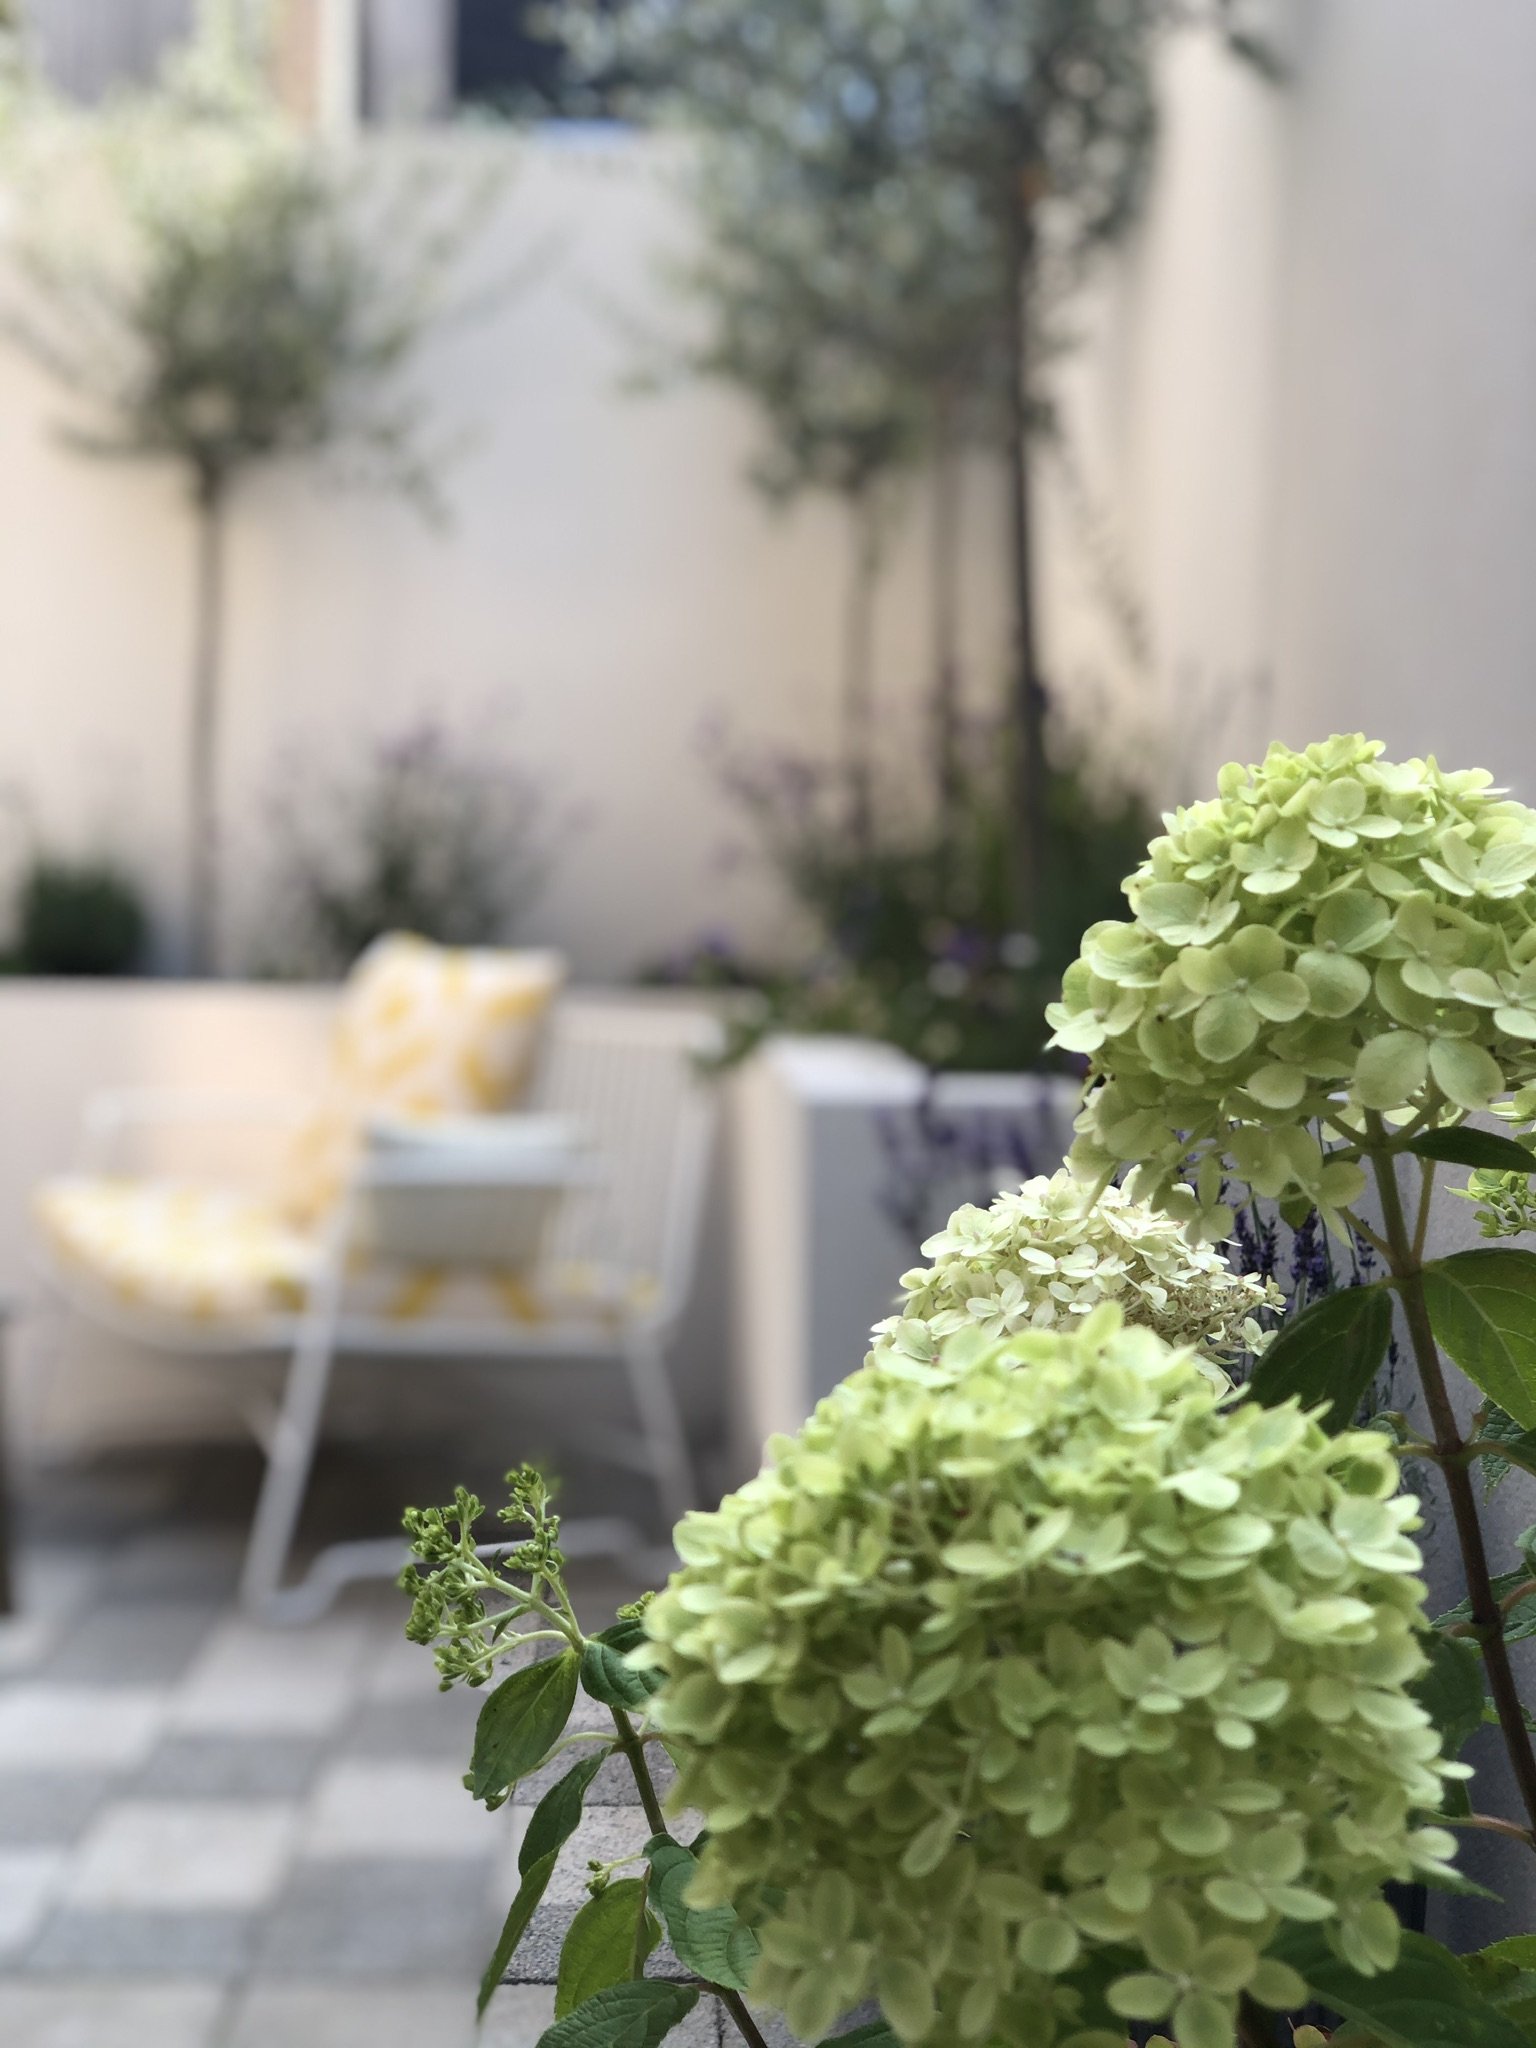 Suitable plants are chosen in this small North London courtyard design